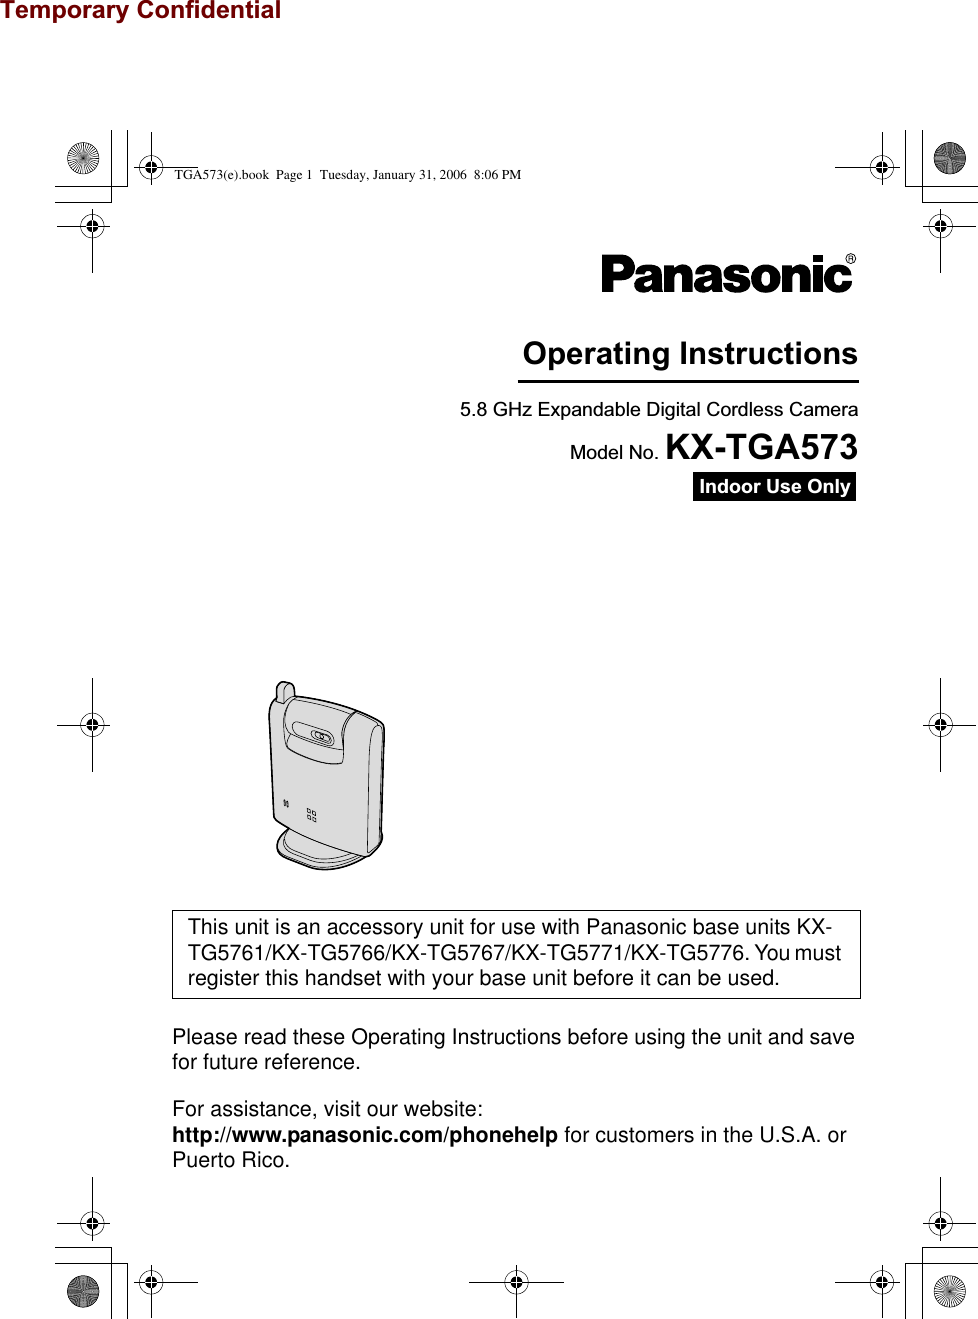 Temporary ConfidentialPlease read these Operating Instructions before using the unit and save for future reference.For assistance, visit our website: http://www.panasonic.com/phonehelp for customers in the U.S.A. or Puerto Rico.This unit is an accessory unit for use with Panasonic base units KX-TG5761/KX-TG5766/KX-TG5767/KX-TG5771/KX-TG5776. You must register this handset with your base unit before it can be used.5.8 GHz Expandable Digital Cordless CameraModel No. KX-TGA573Operating InstructionsIndoor Use OnlyTGA573(e).book  Page 1  Tuesday, January 31, 2006  8:06 PM